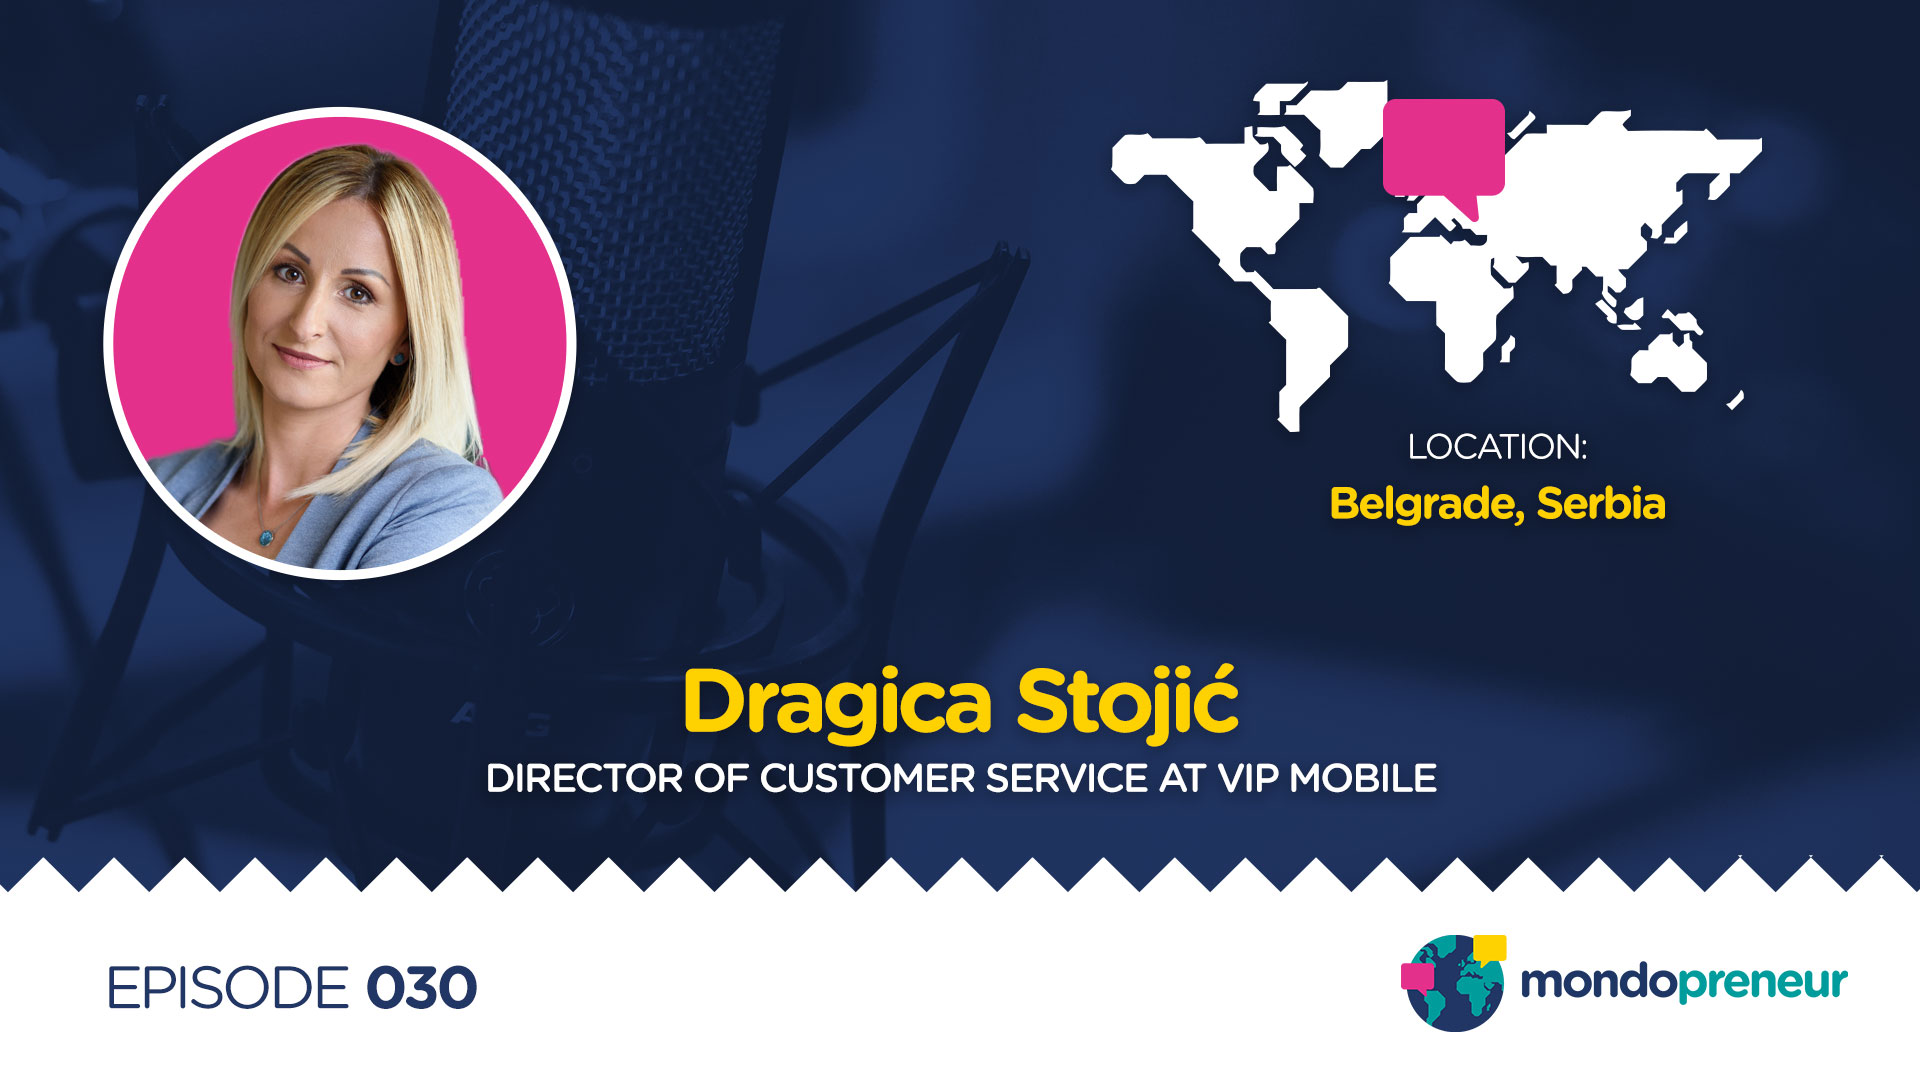 EP030: Dragica Stojić, Director of Customer Service at Vip mobile from Serbia